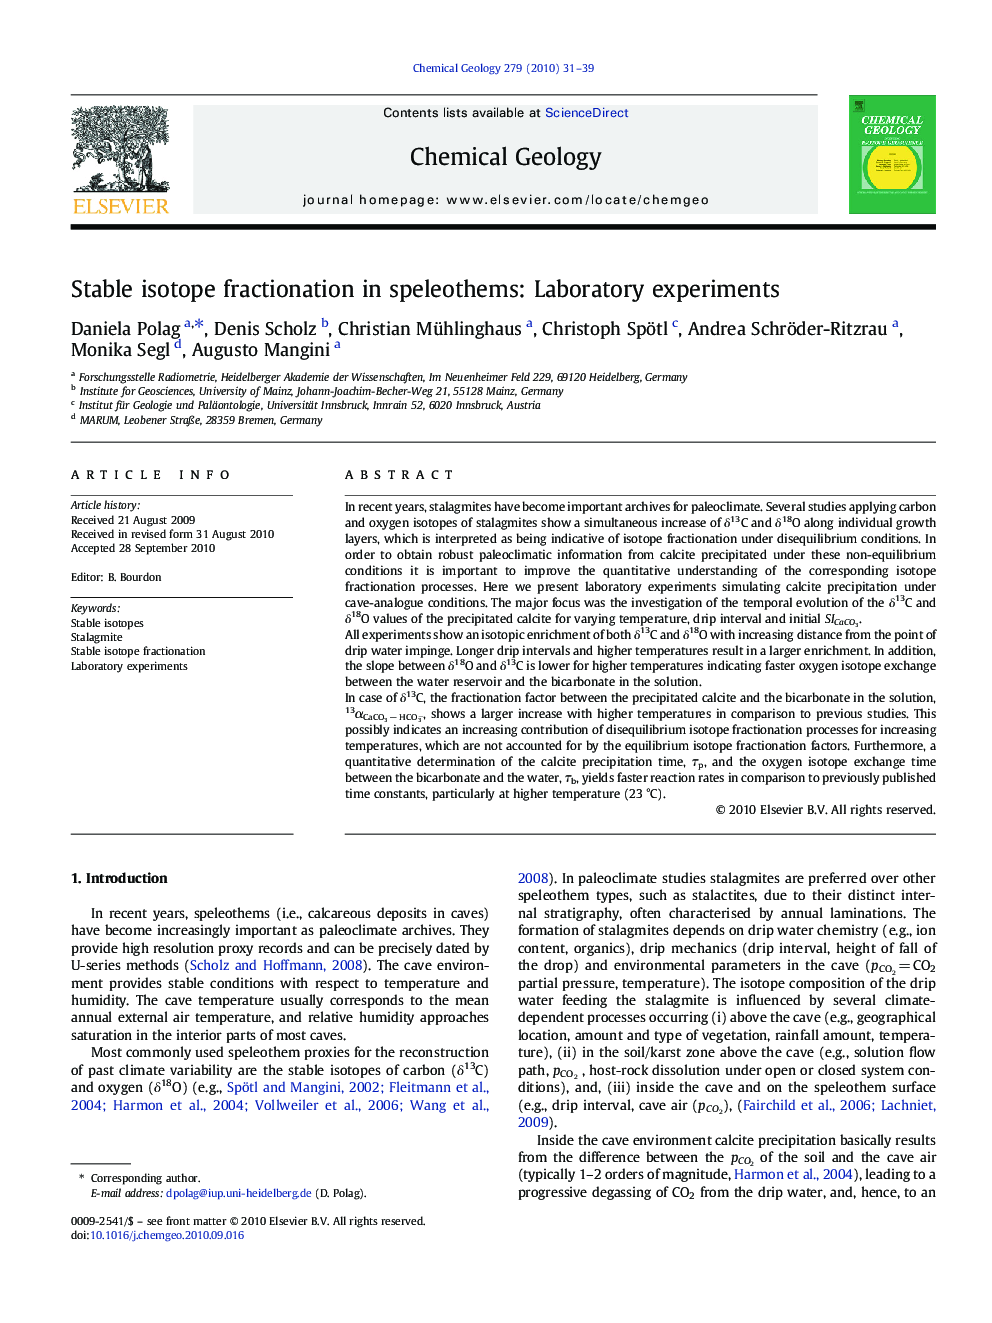 Stable isotope fractionation in speleothems: Laboratory experiments